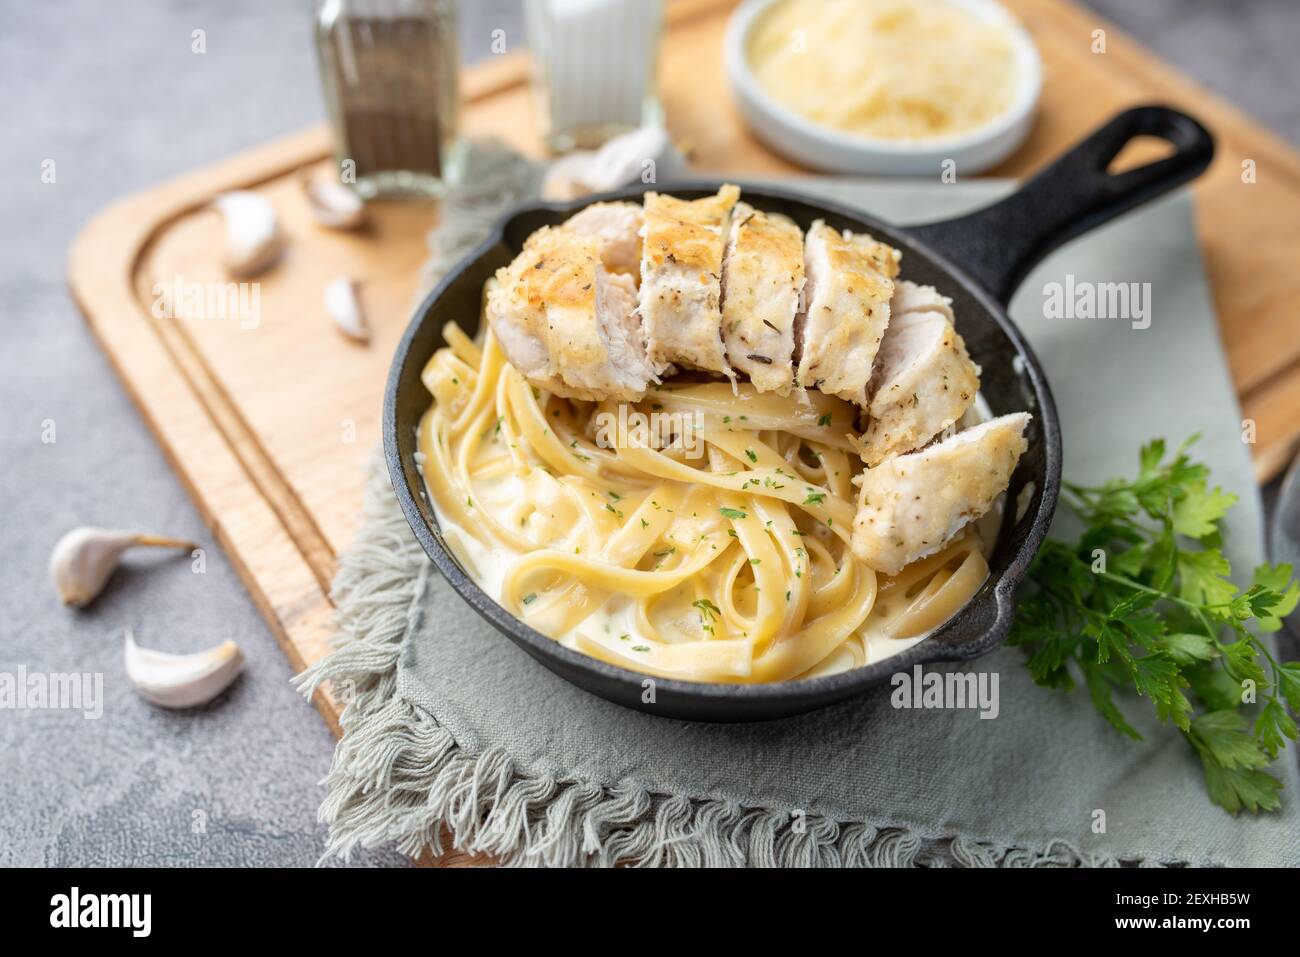 Alfredo pasta dinner with creamy white sauce and herbs Stock Photo - Alamy